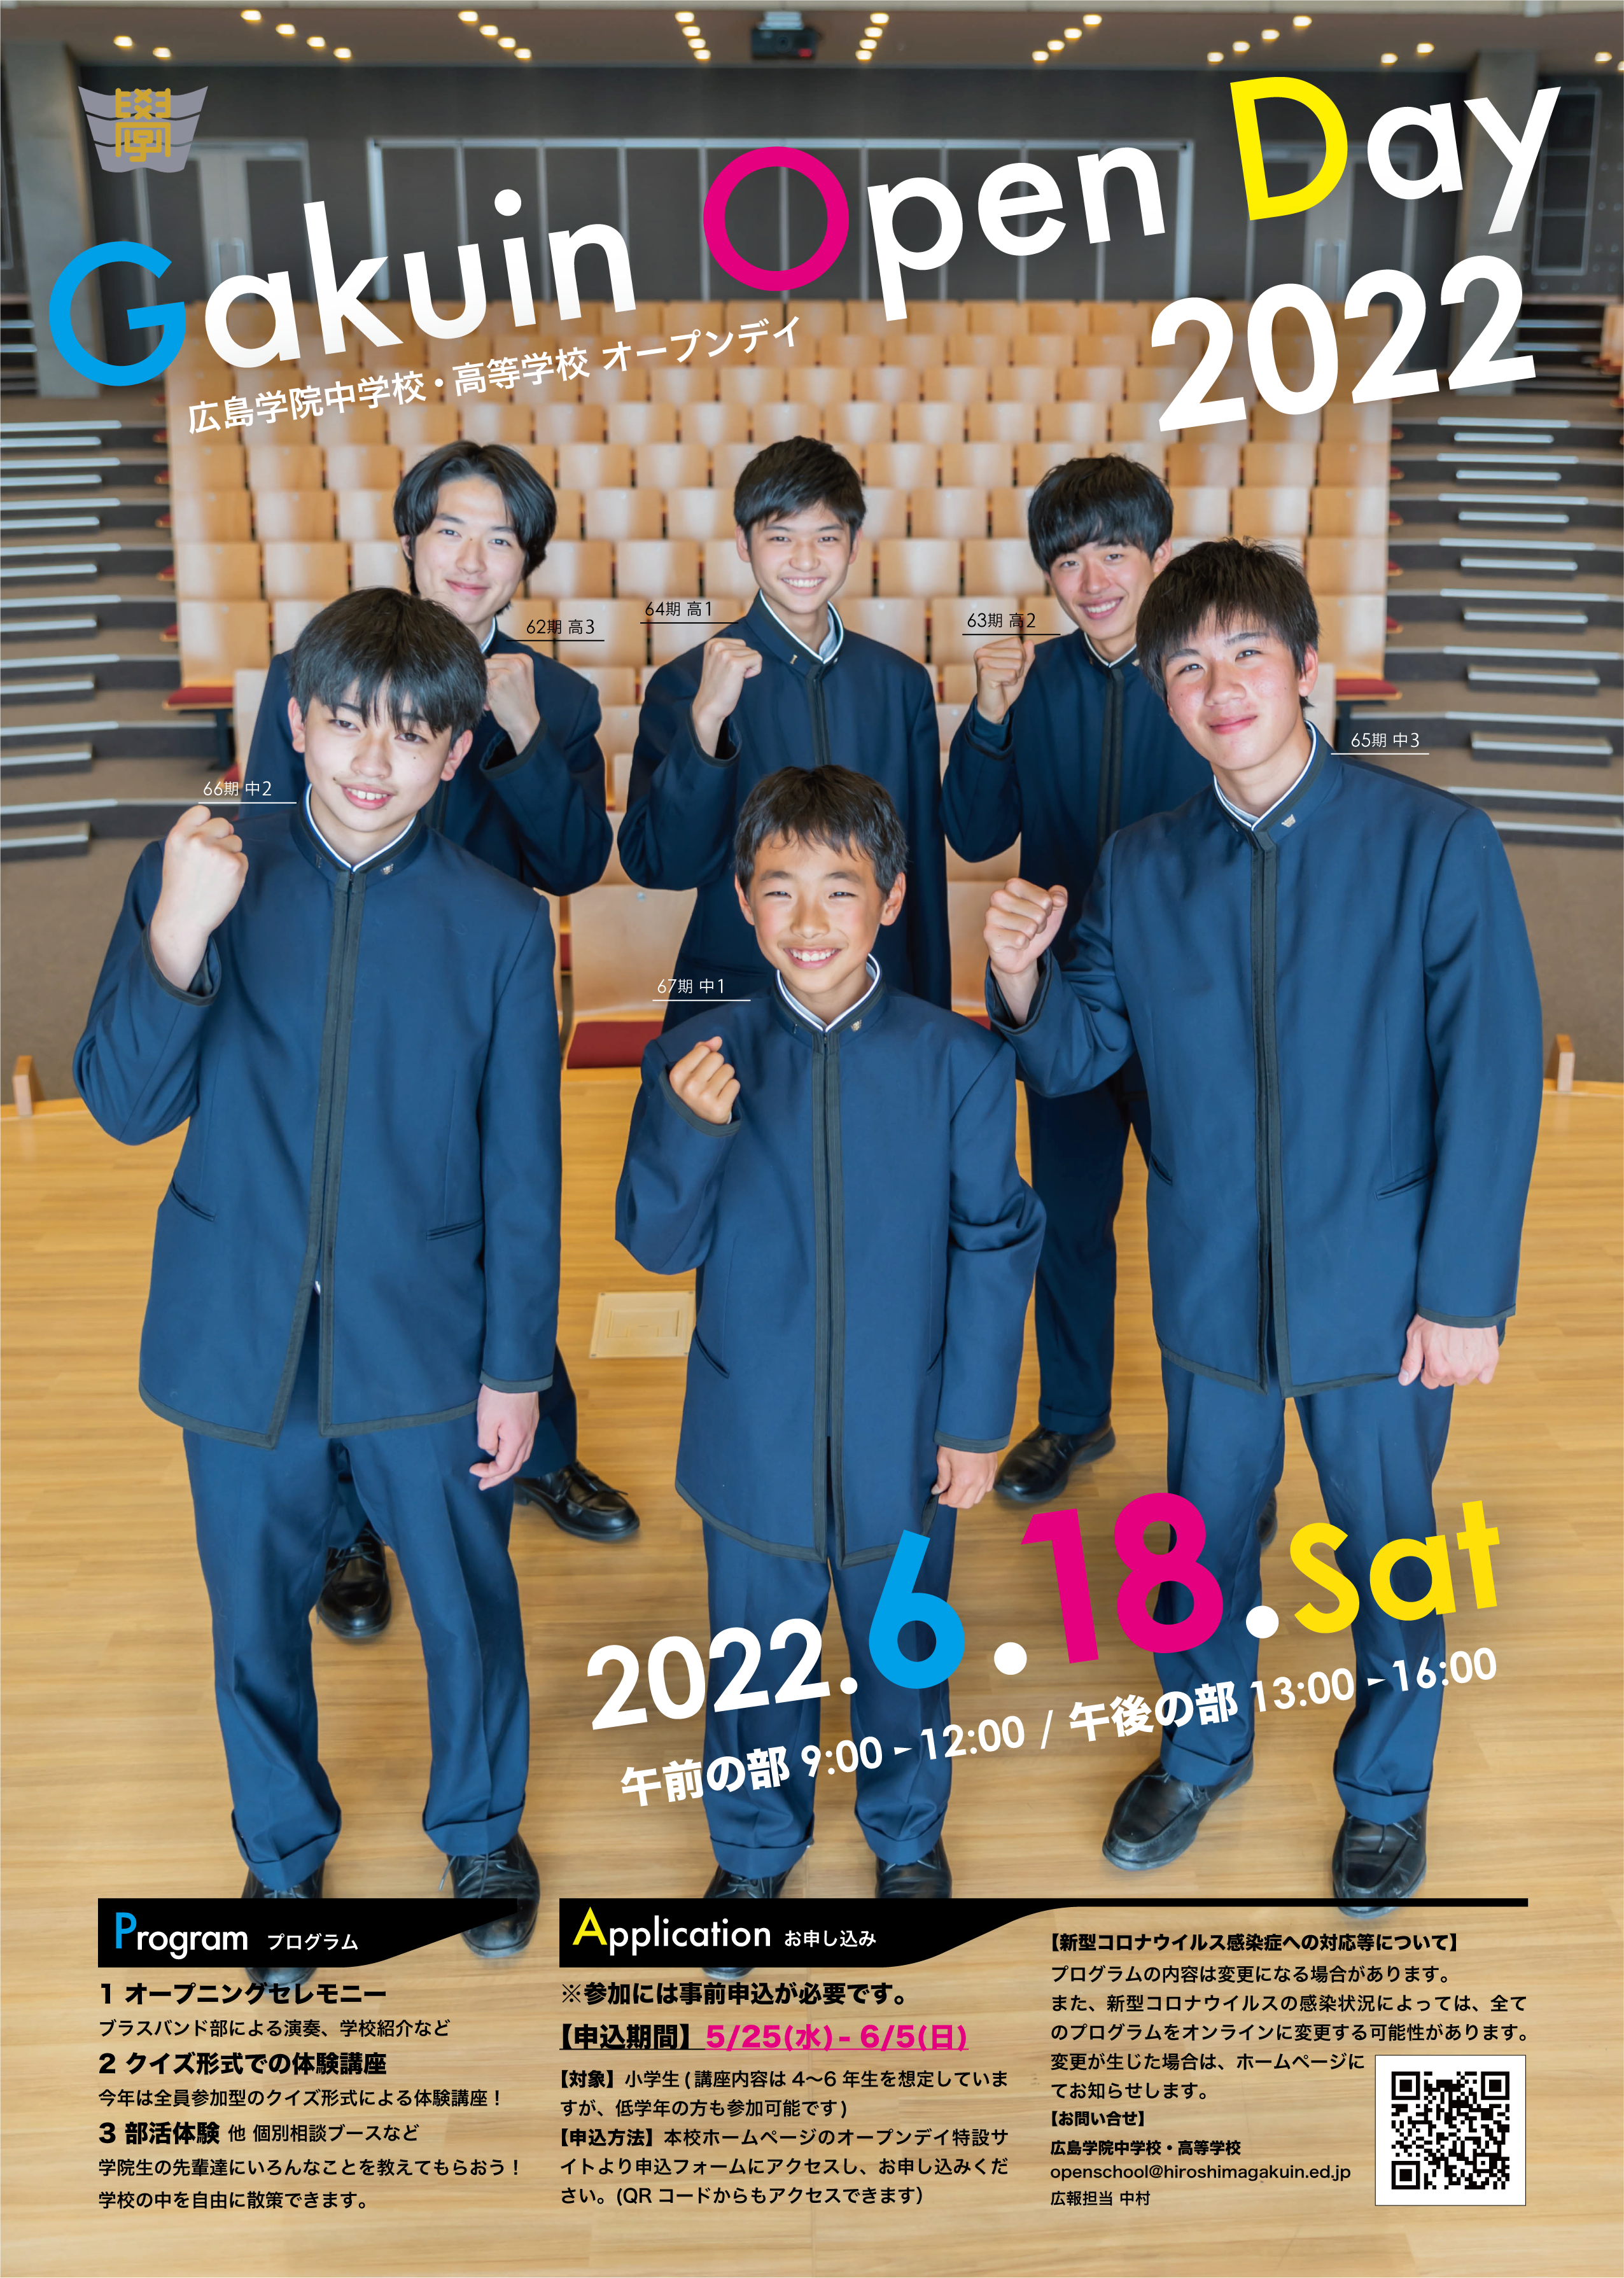 Gakuin Open Day 2022